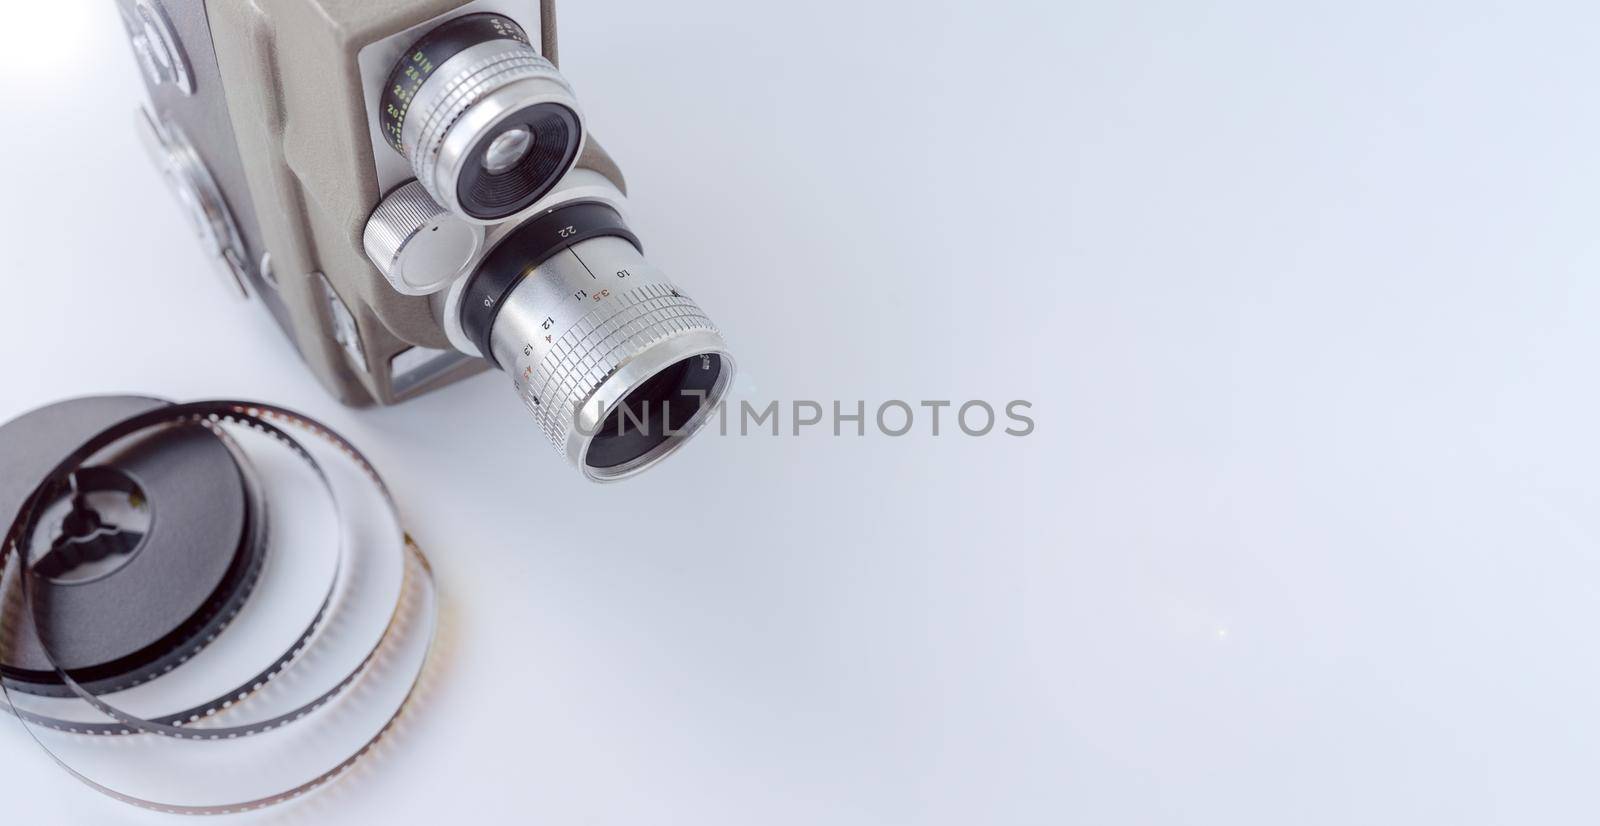 Vintage 8mm camera with 8mm reel on white background.